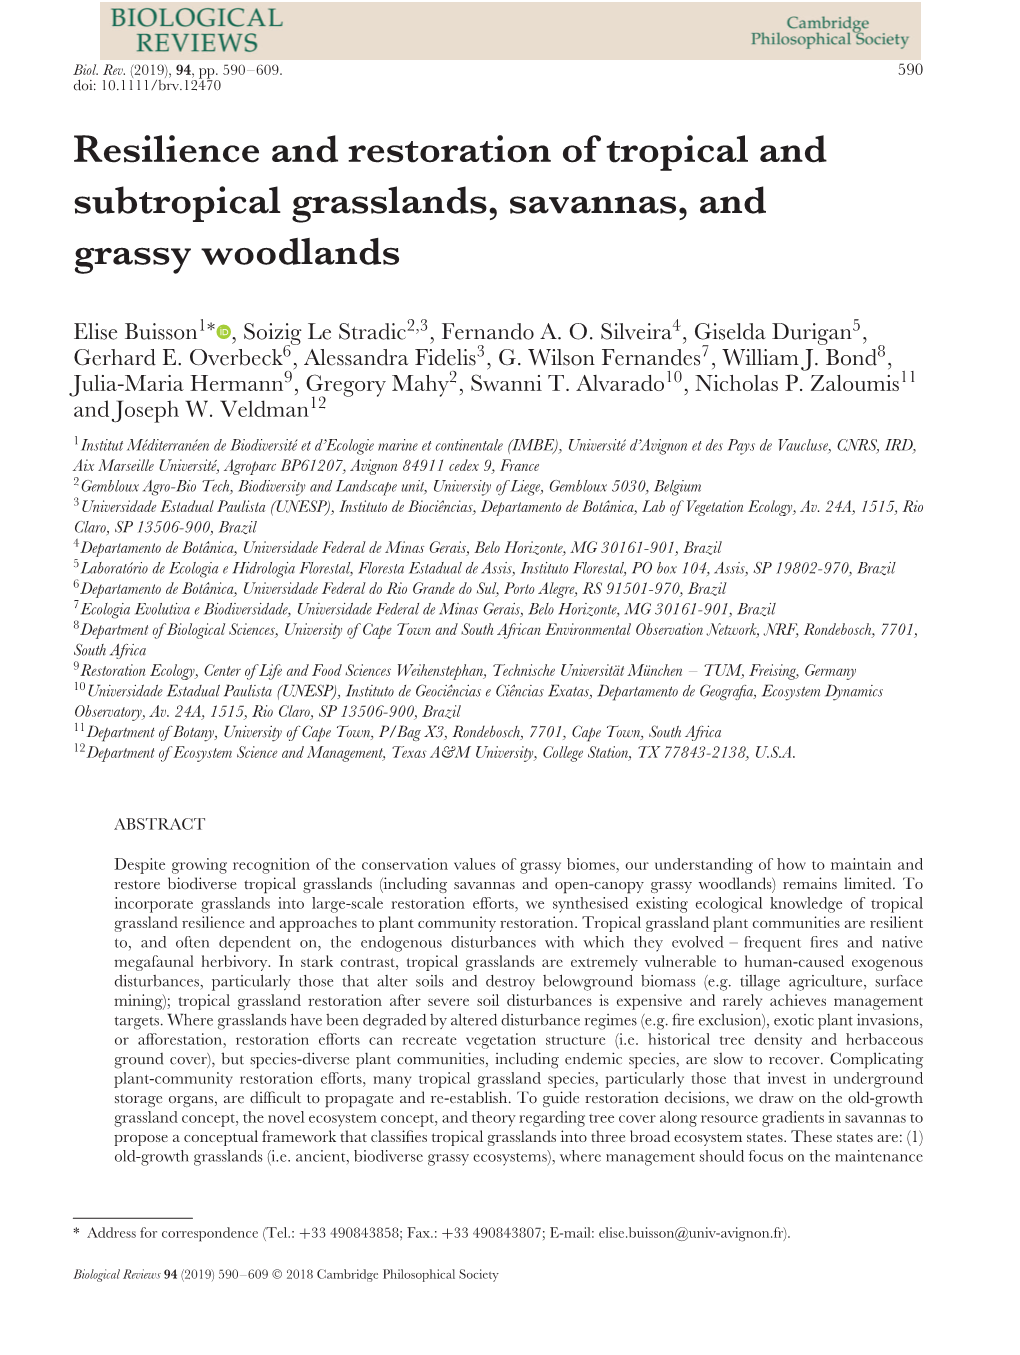 Resilience and Restoration of Tropical and Subtropical Grasslands, Savannas, and Grassy Woodlands